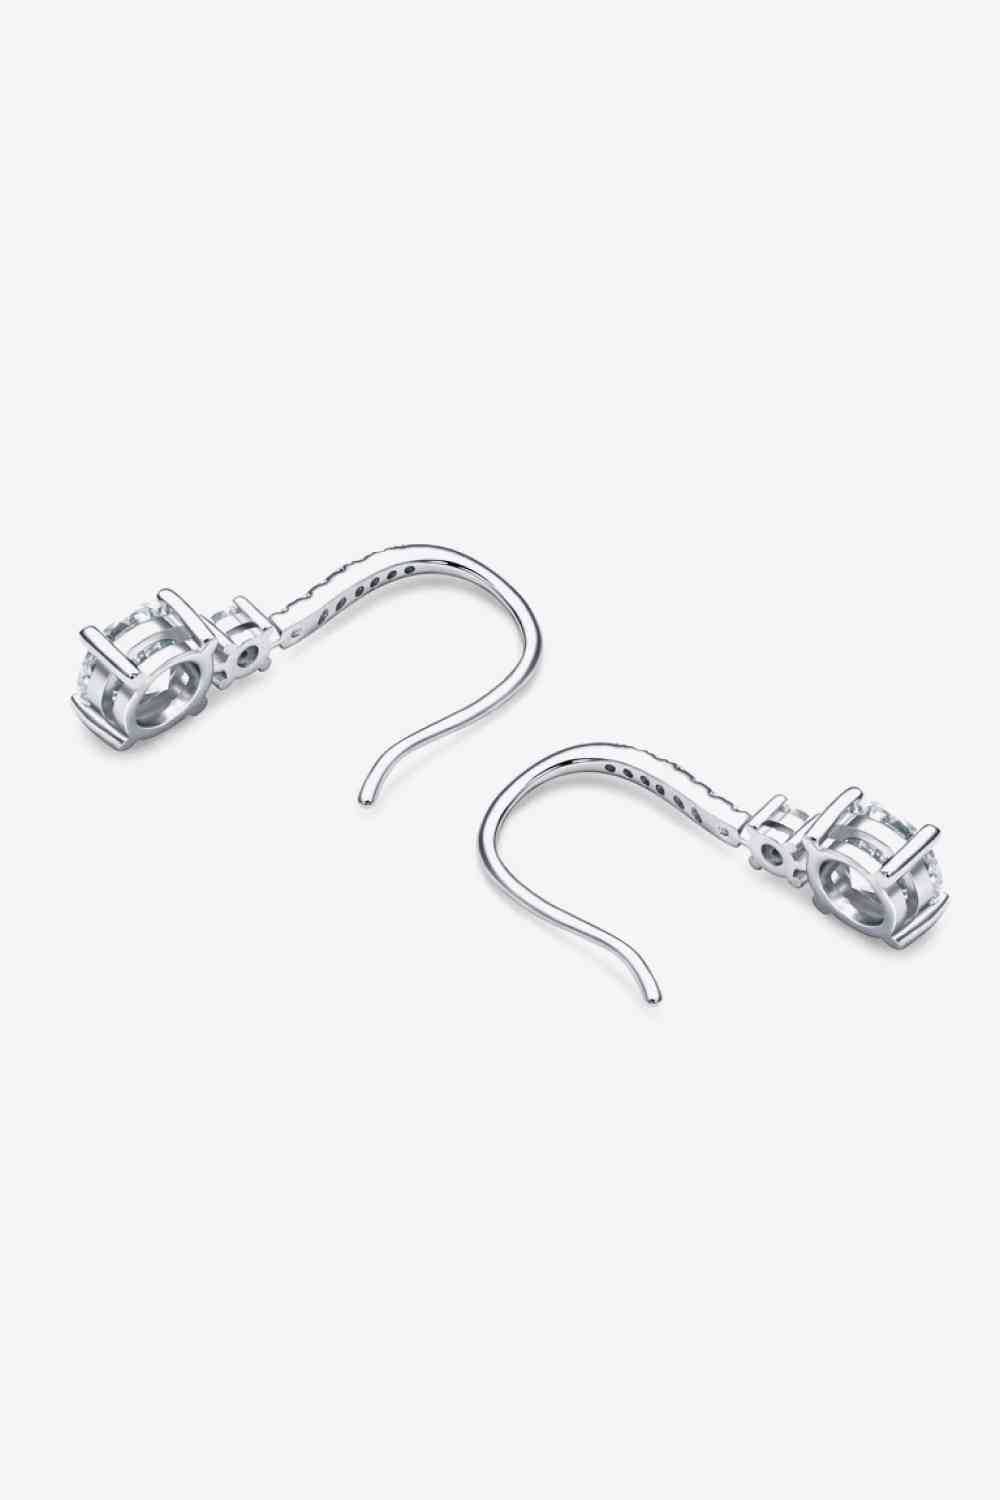 a pair of metal hooks on a white background